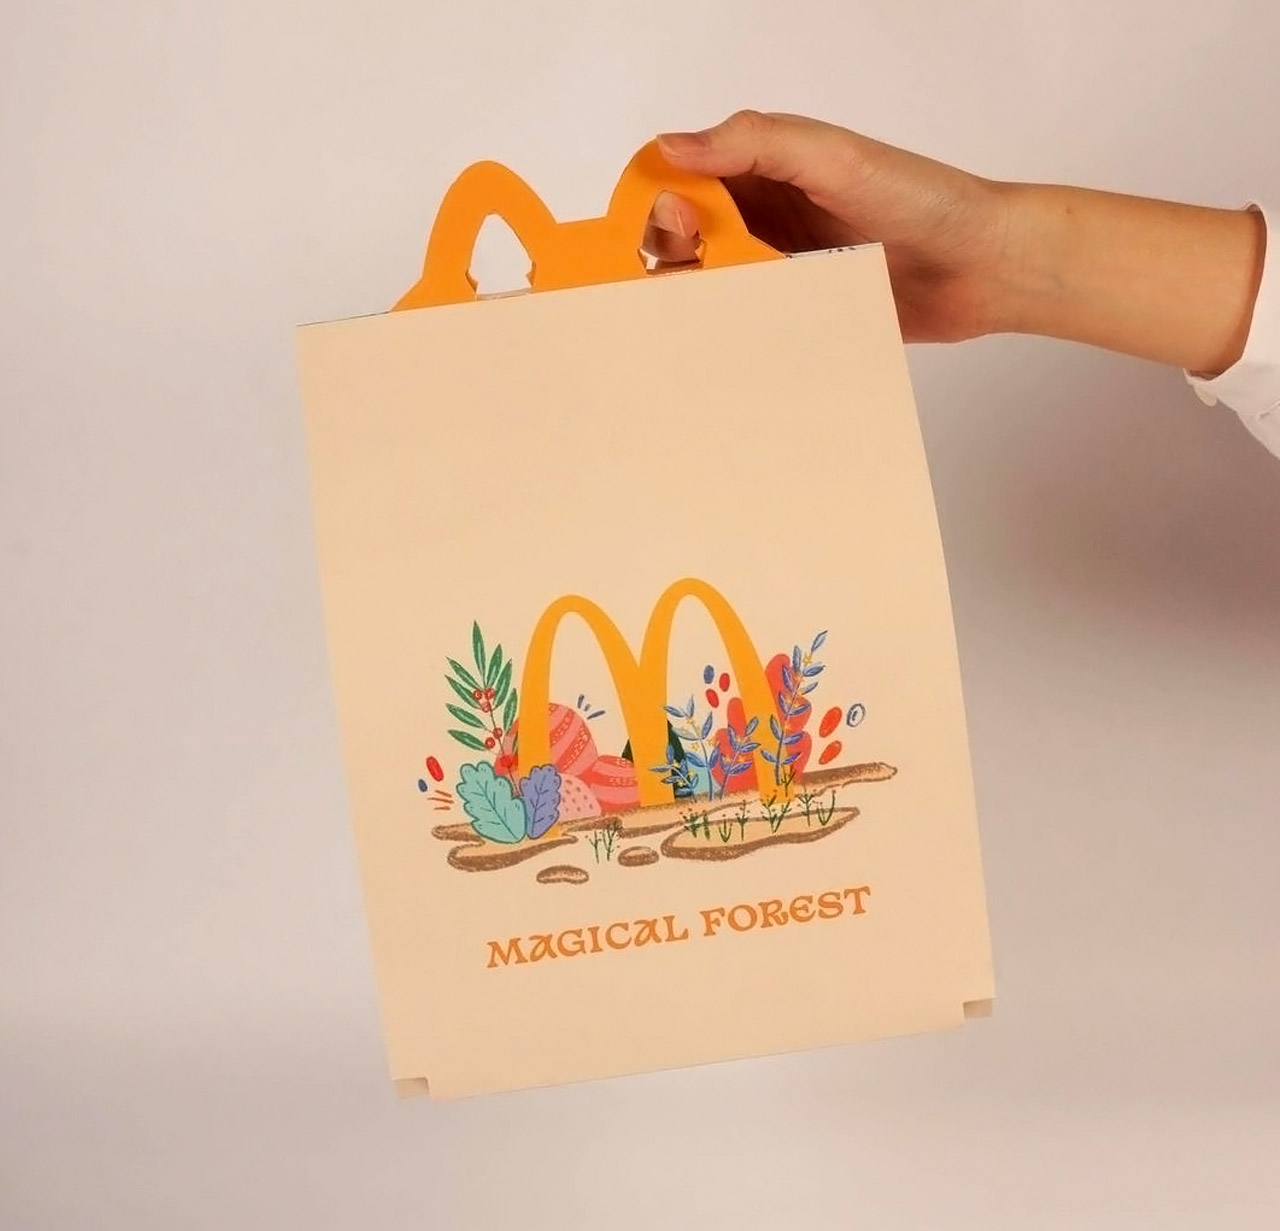 Turner Duckworth redesigns iconic McDonald's Happy Meal box